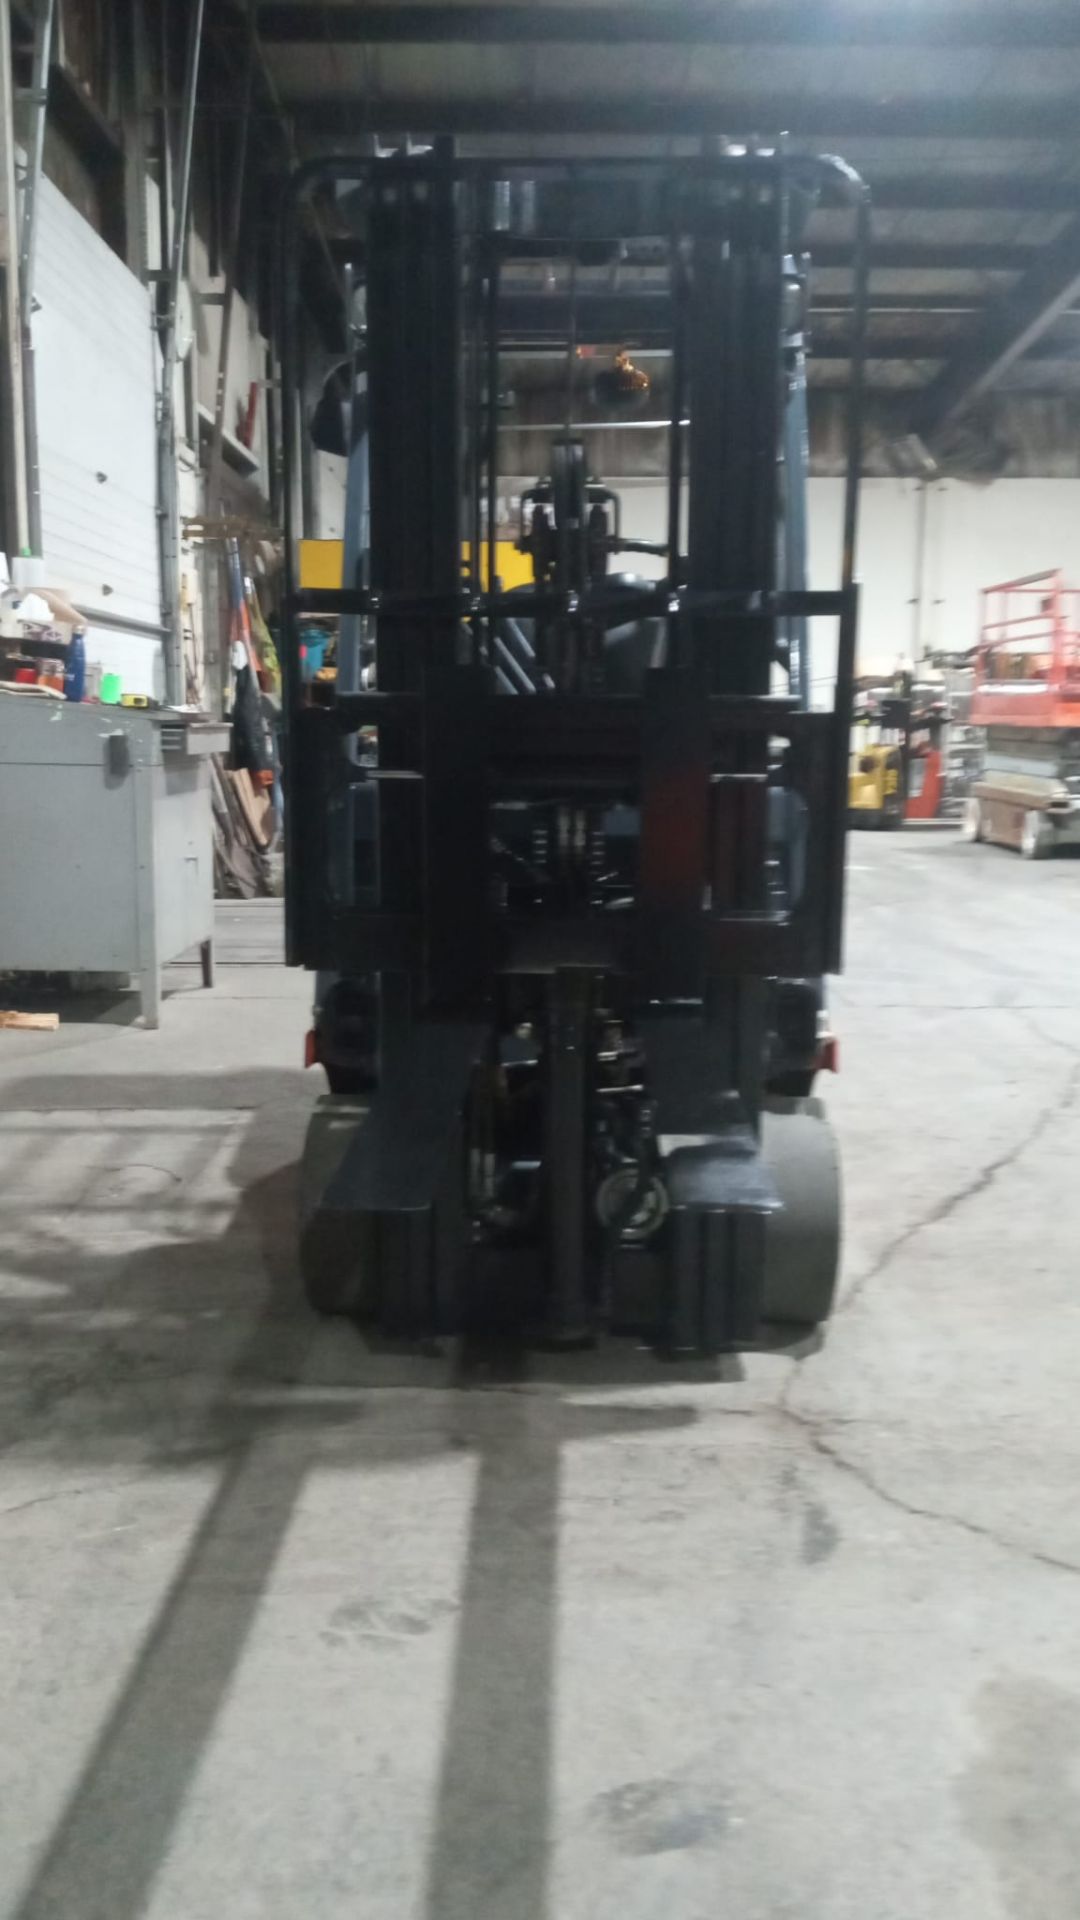 2018 TOYOTA 3,000lbs Capacity LPG (Propane) Forklift with sideshift and 3-STAGE MAST (no propane - Image 6 of 6